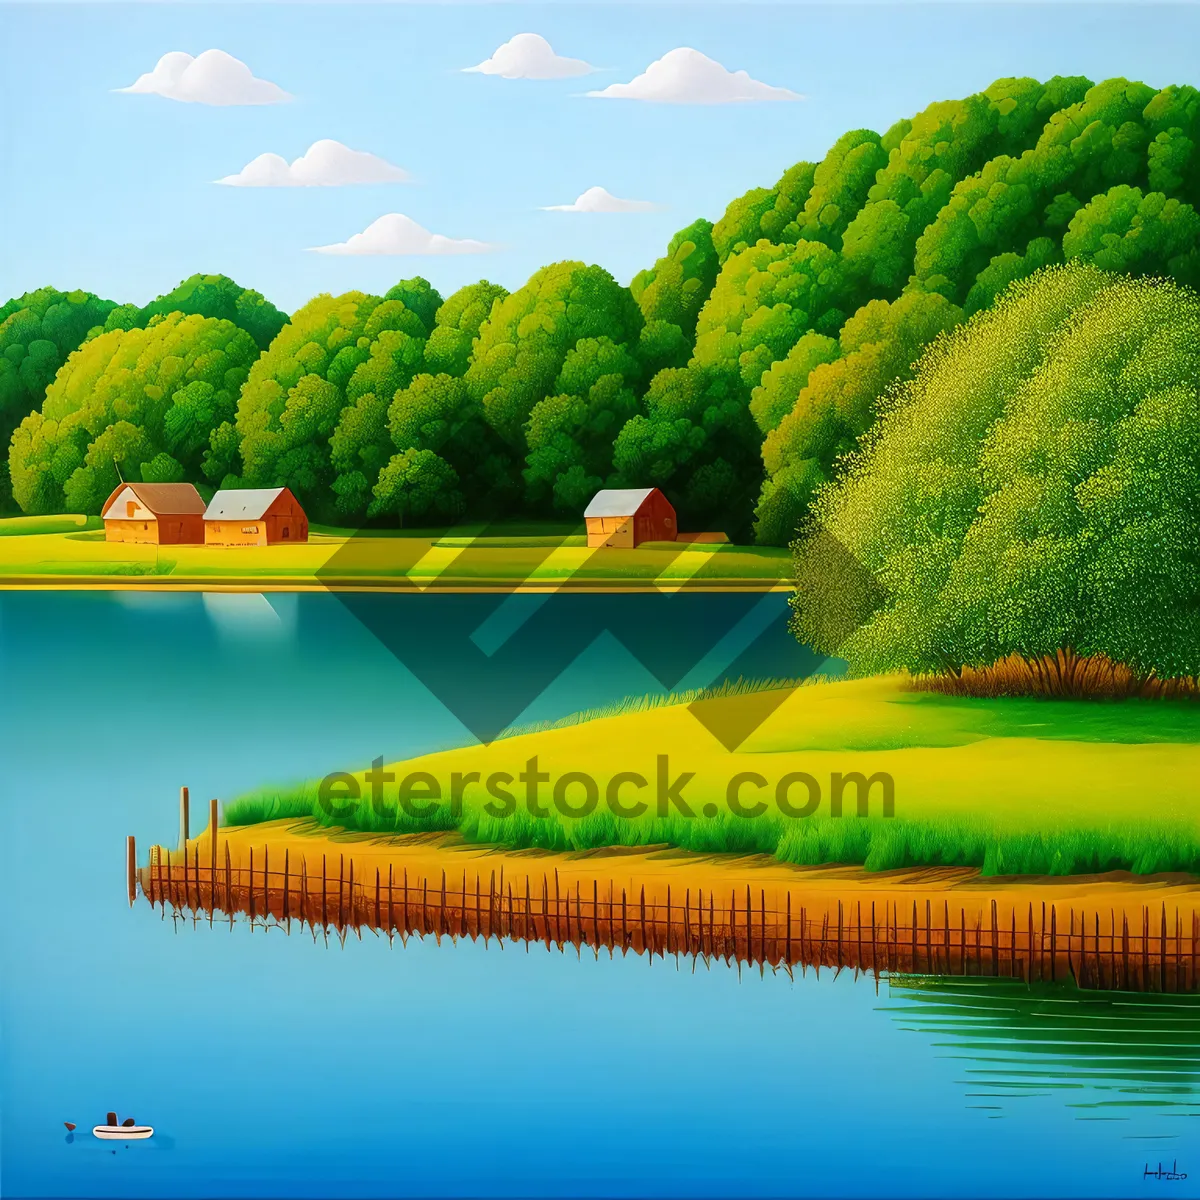 Picture of Serenity: Summer Landscape with Tree and Grass